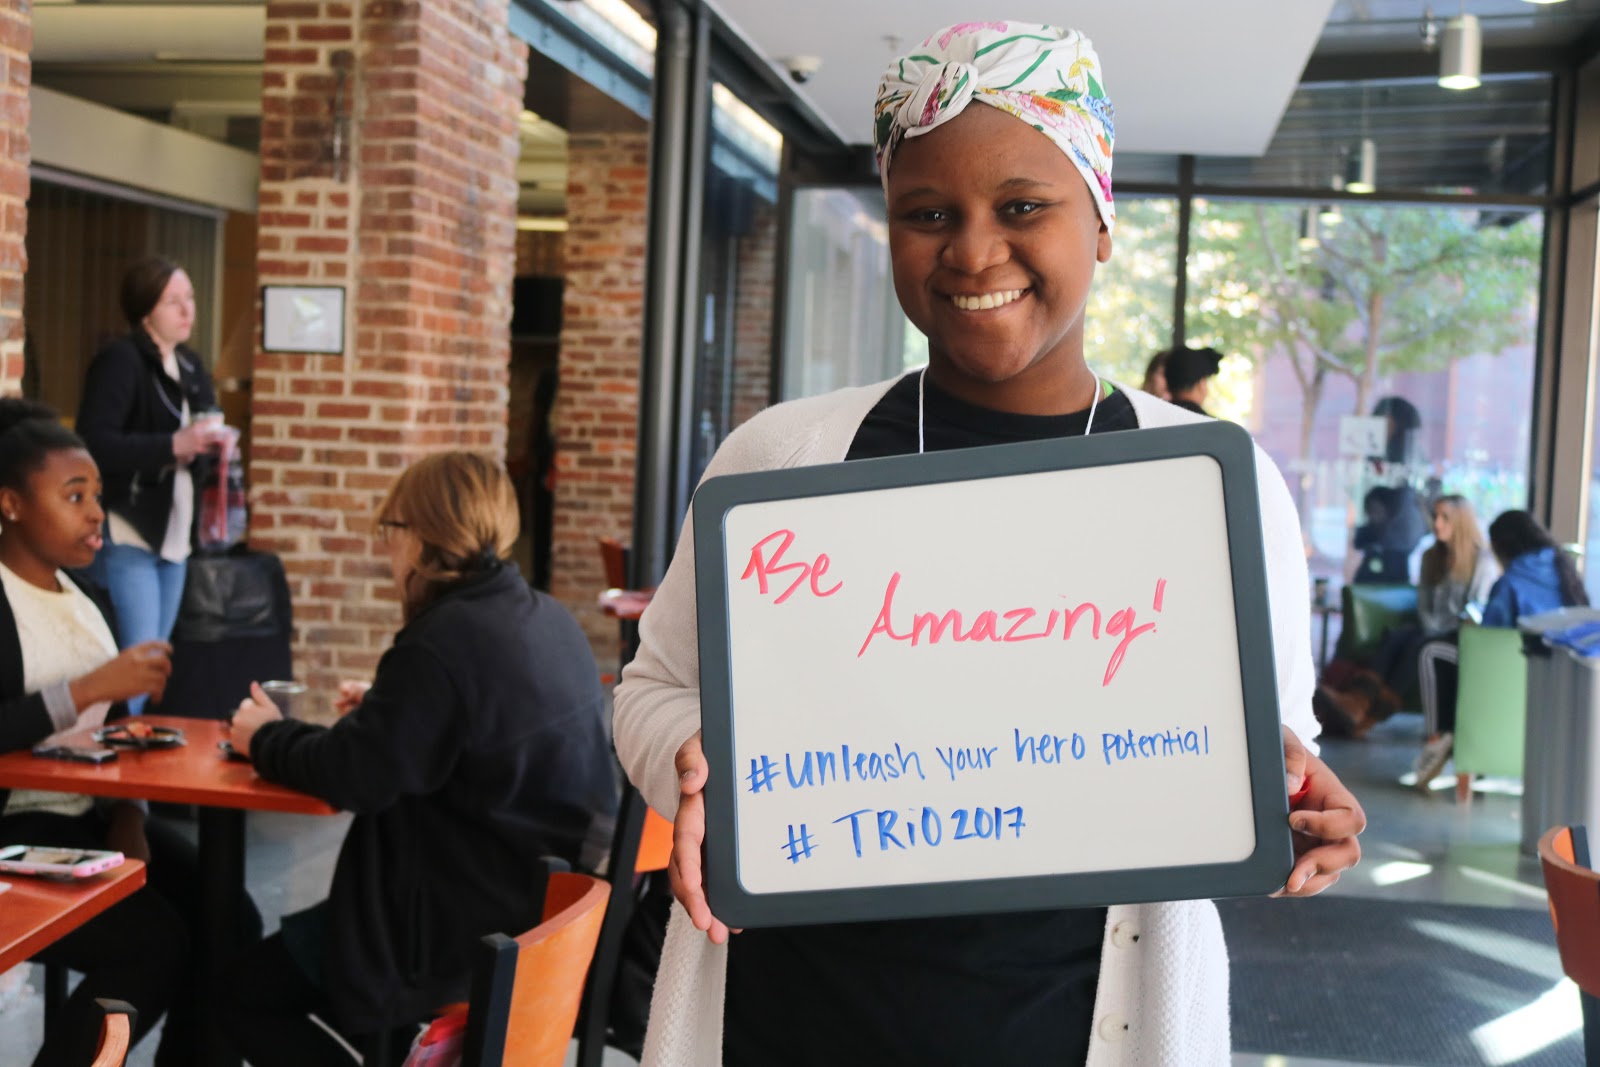 A photo of an NC State student holding up a whiteboard that reads "Be Amazing"